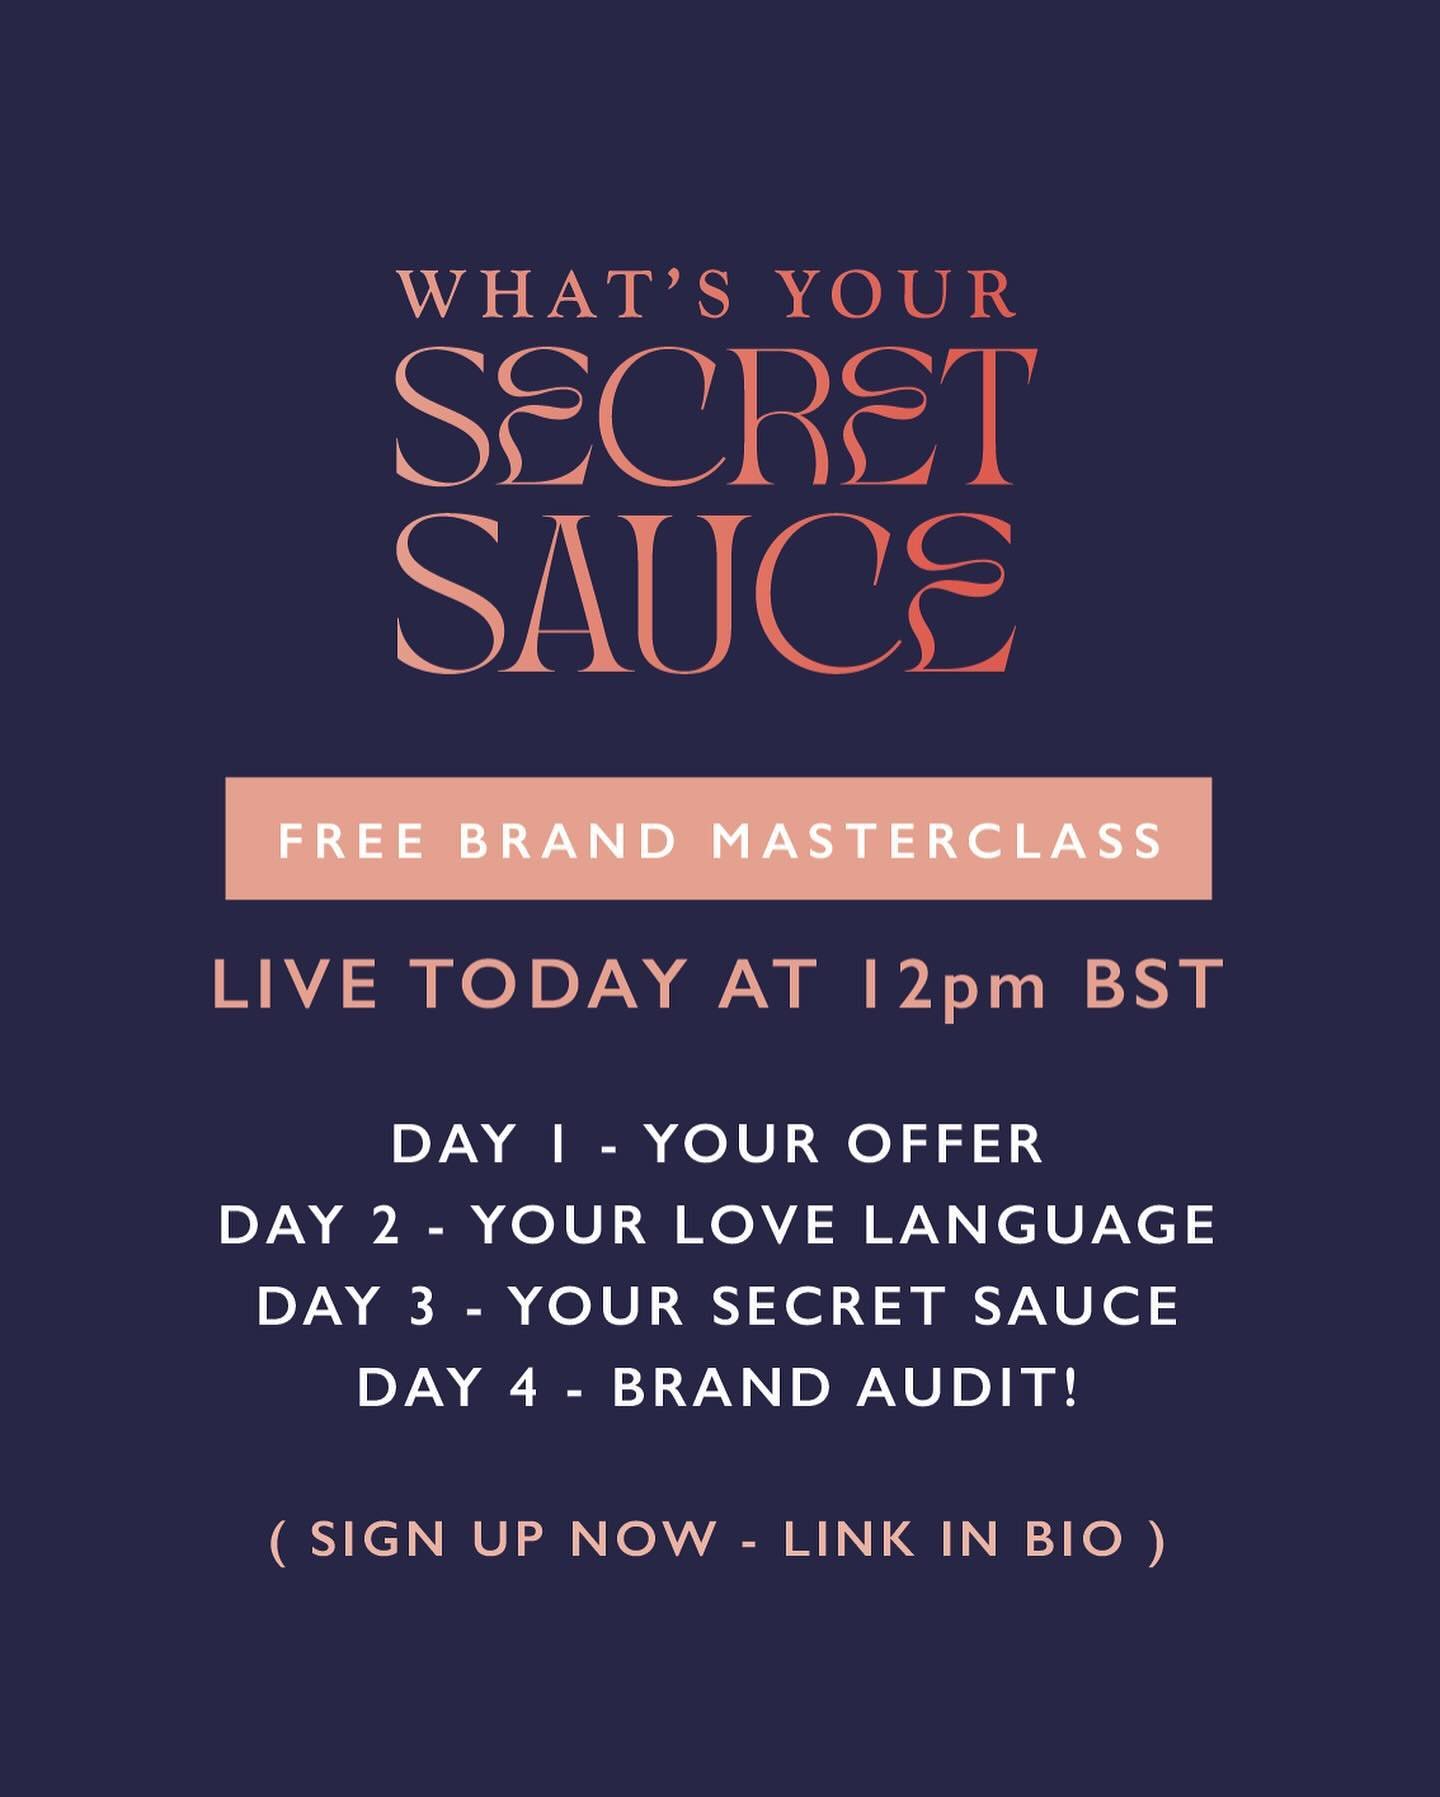 LIVE TODAY AT 12 &gt; make sure you&rsquo;re in the Secret Sauce Masterclass facebook group before 11 today to join us for an incredible week deeep diving your brand. See you soon! 

#secretsauce #whatsyoursecretsauce #suitepress #brandmasterclass #s